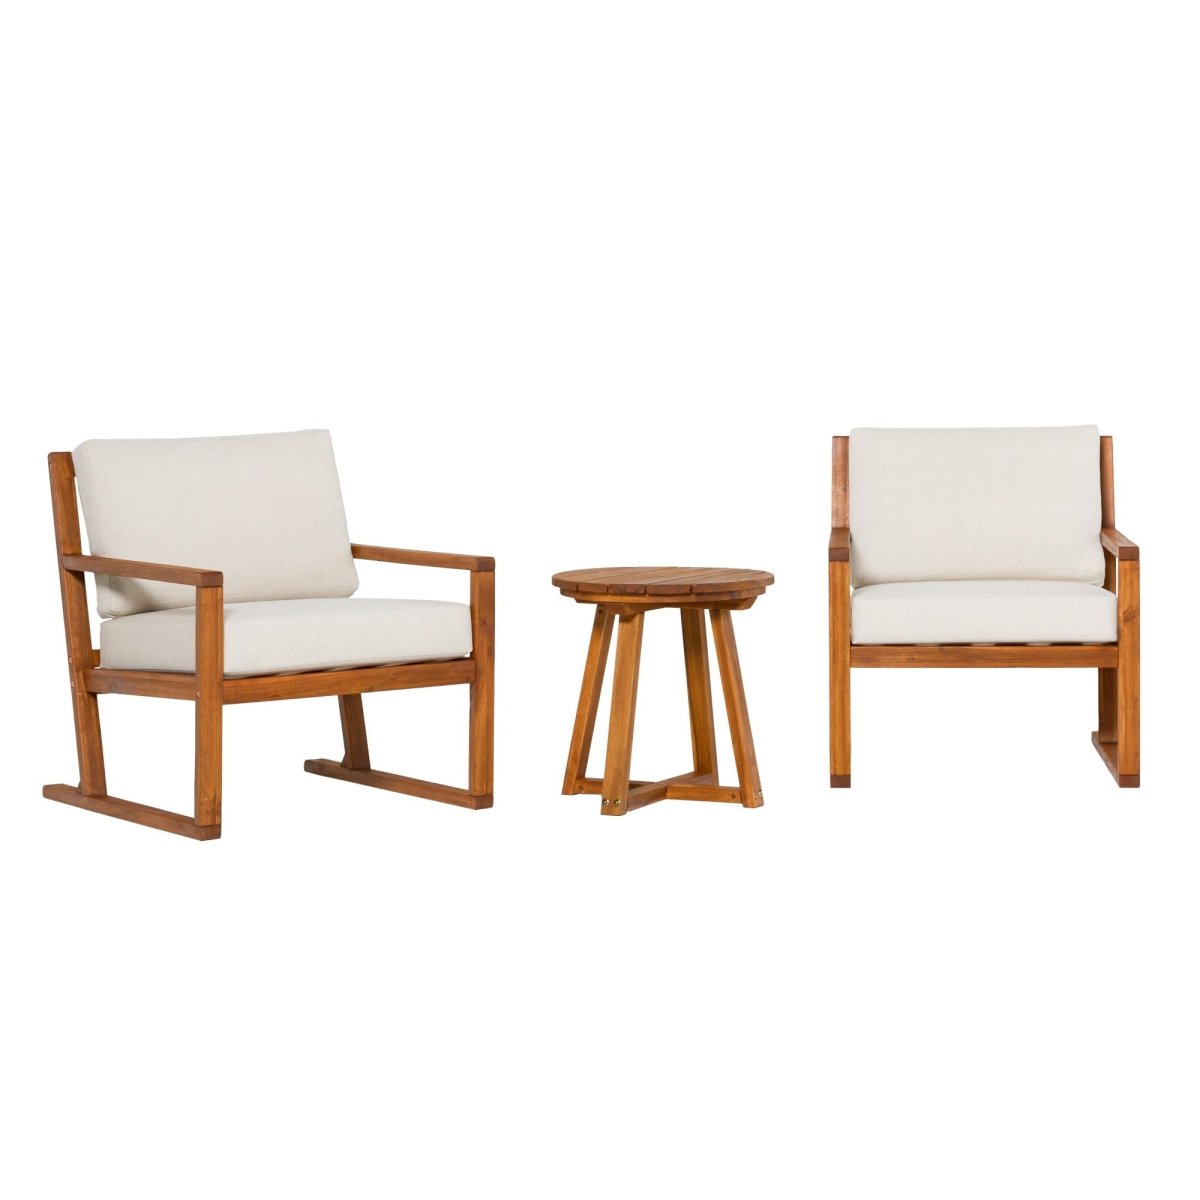 Walker Edison Prenton 3-Piece Modern Acacia Outdoor Slatted Chat Set with Side Table - lily & onyx